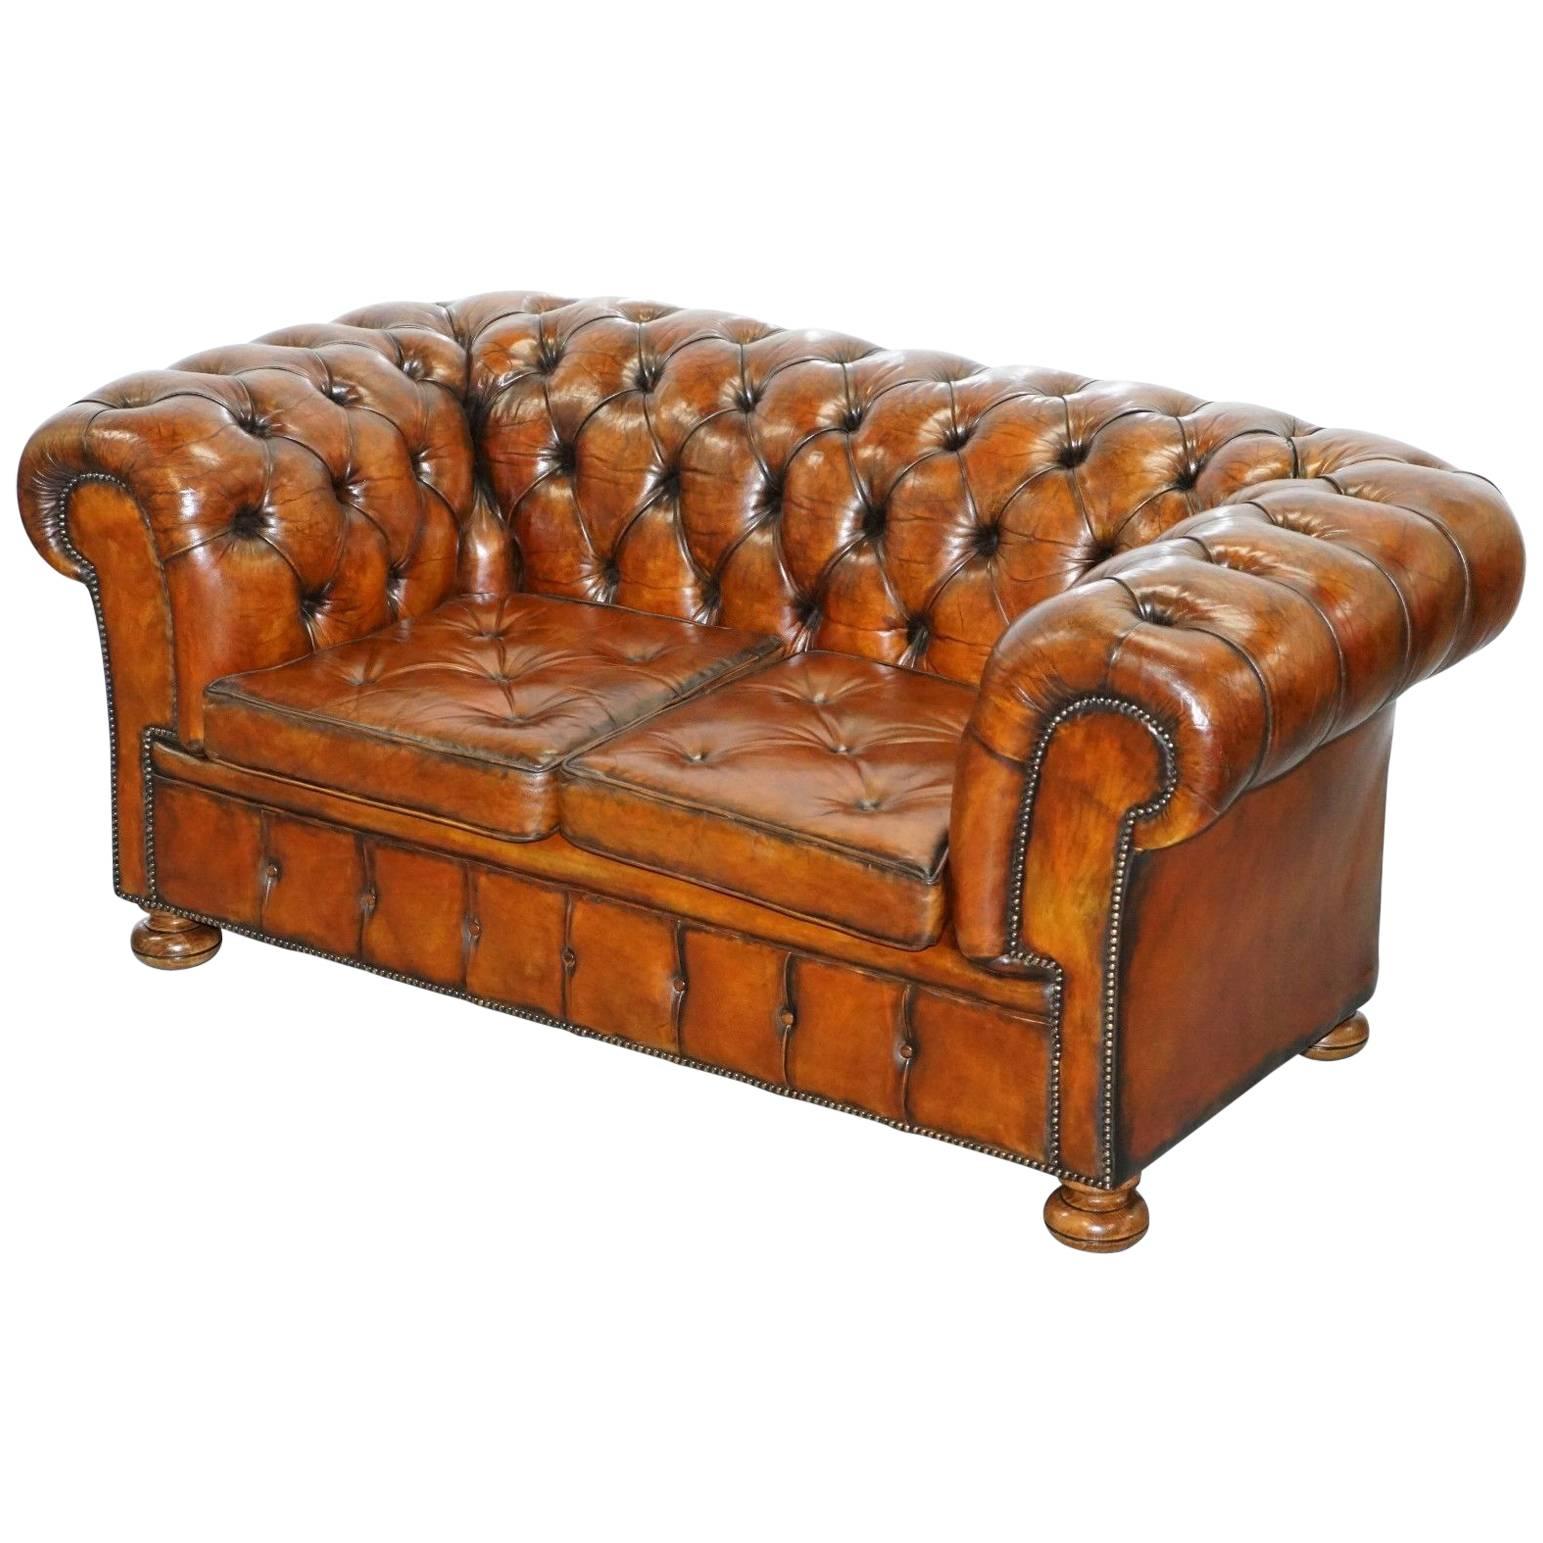 Sprung Walnut Thomas Chippendale Restored Aged Brown Leather Chesterfield Sofa